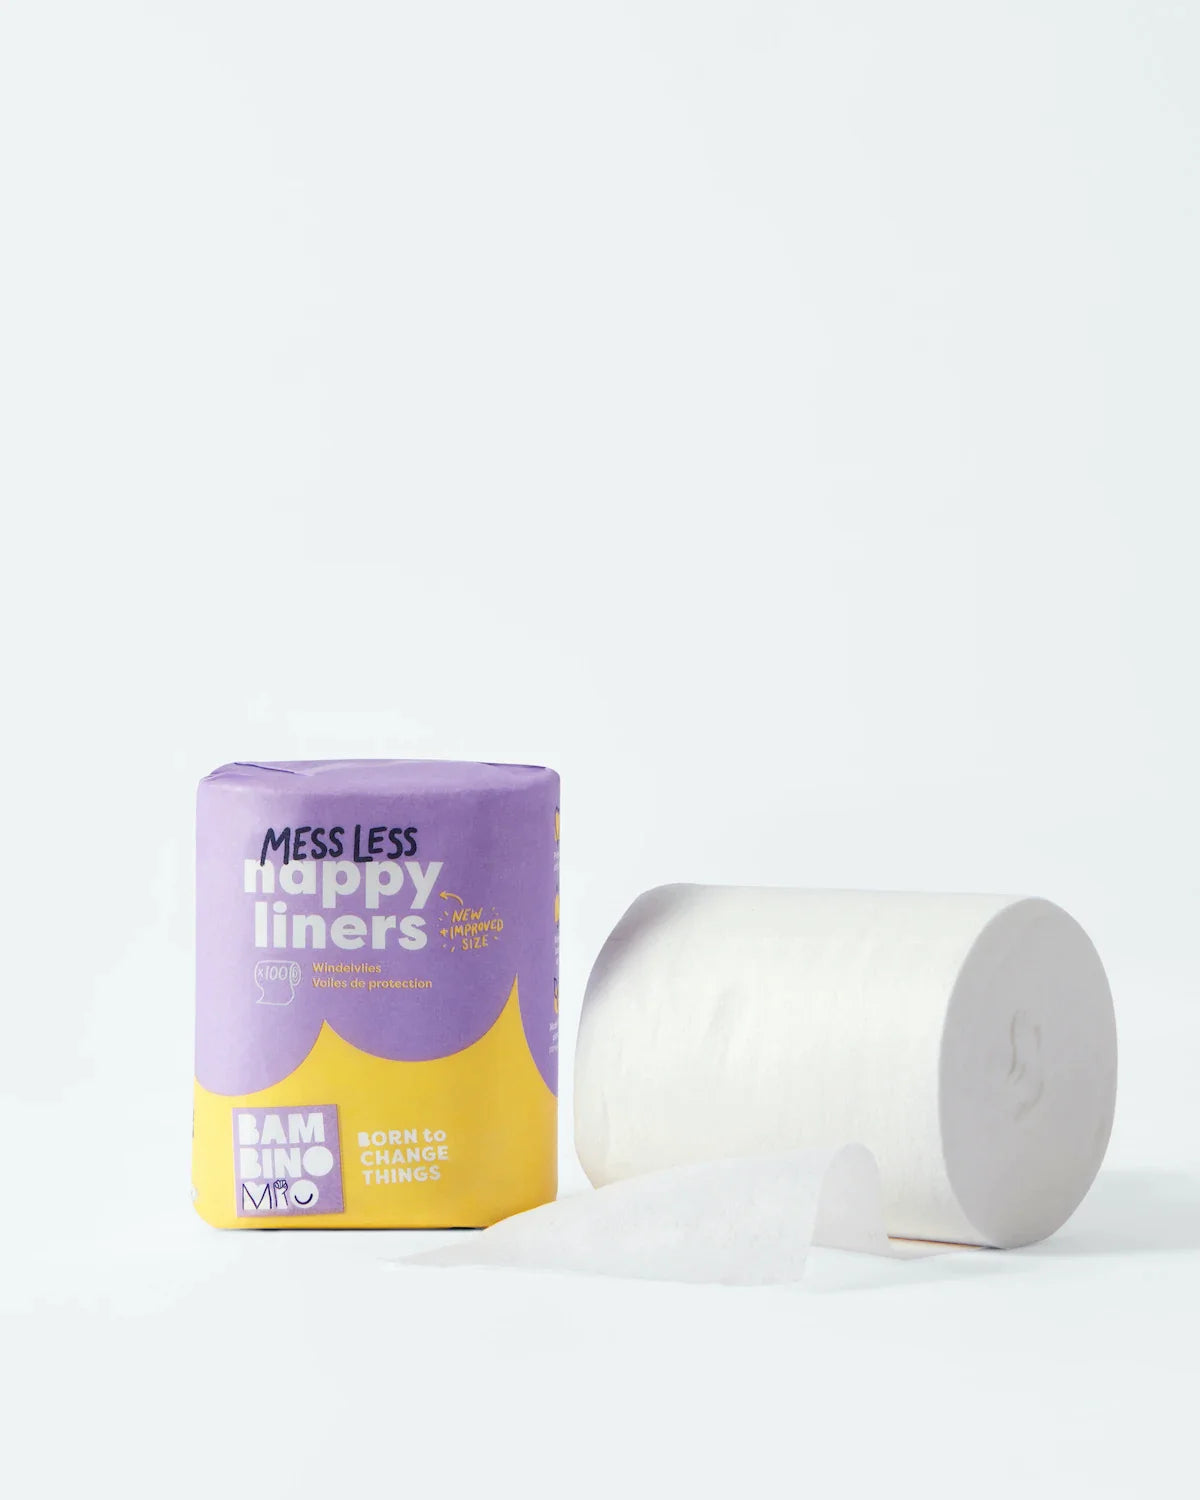 Old Reusable Nappies: Innovative Ways to Repurpose Old Reusable Nappie –  Bambino Mio (UK & IE)